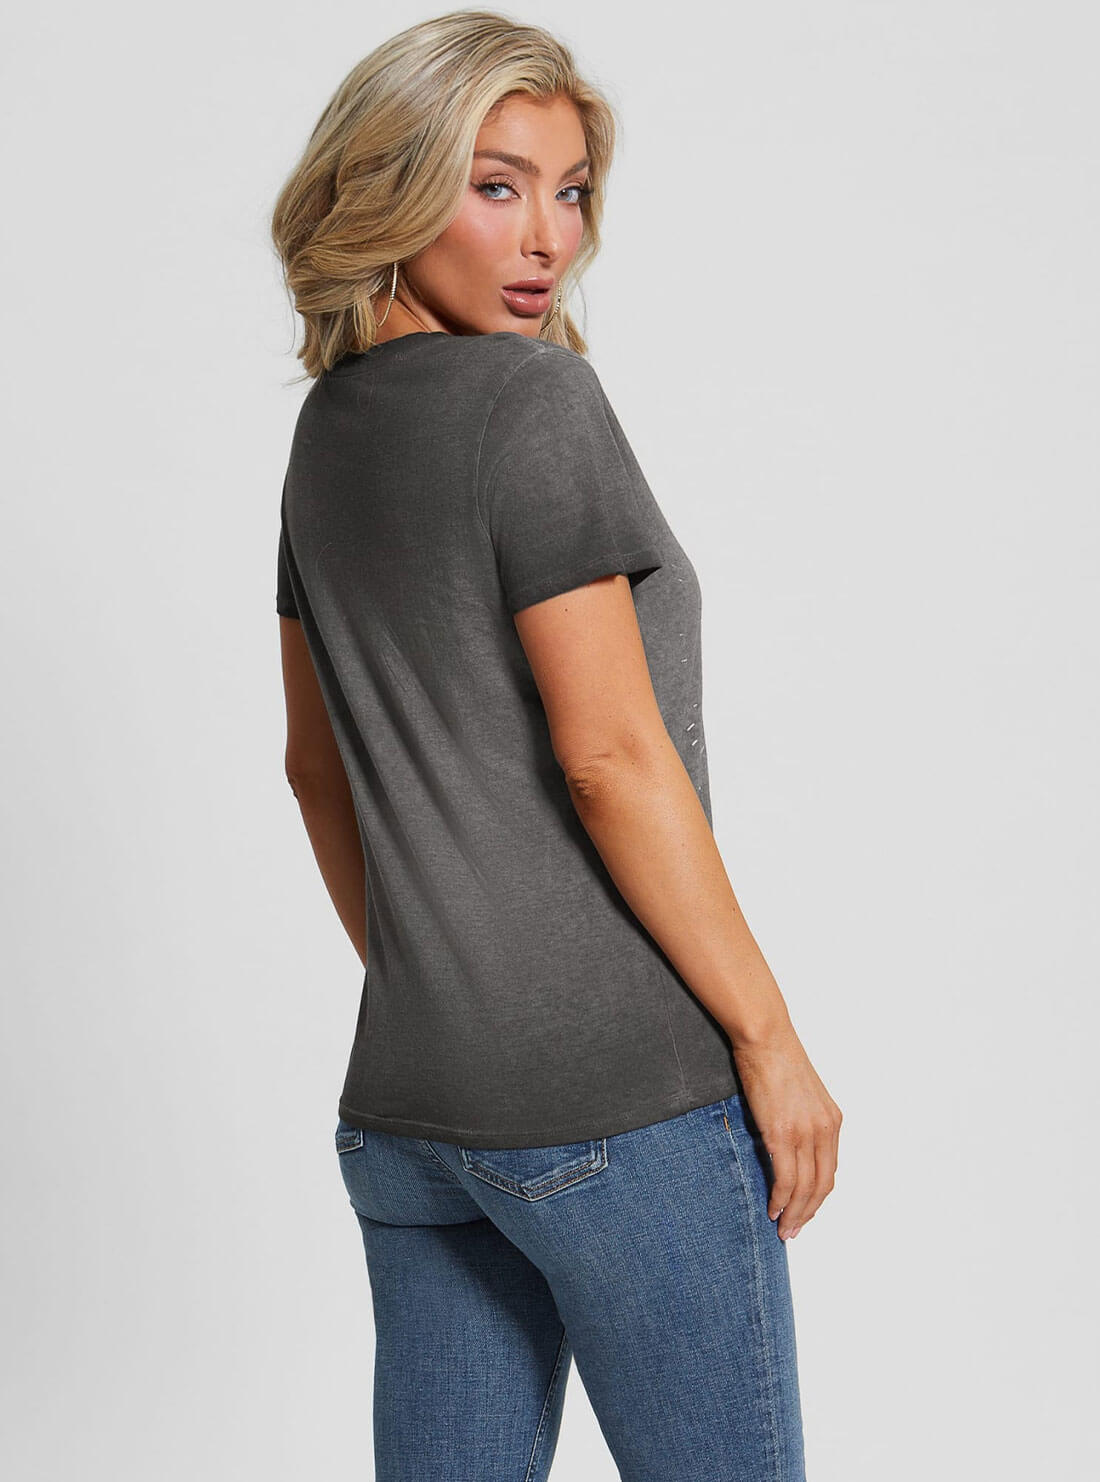 Grey Dance All Night Graphic T-Shirt | GUESS Women's Apparel | back view